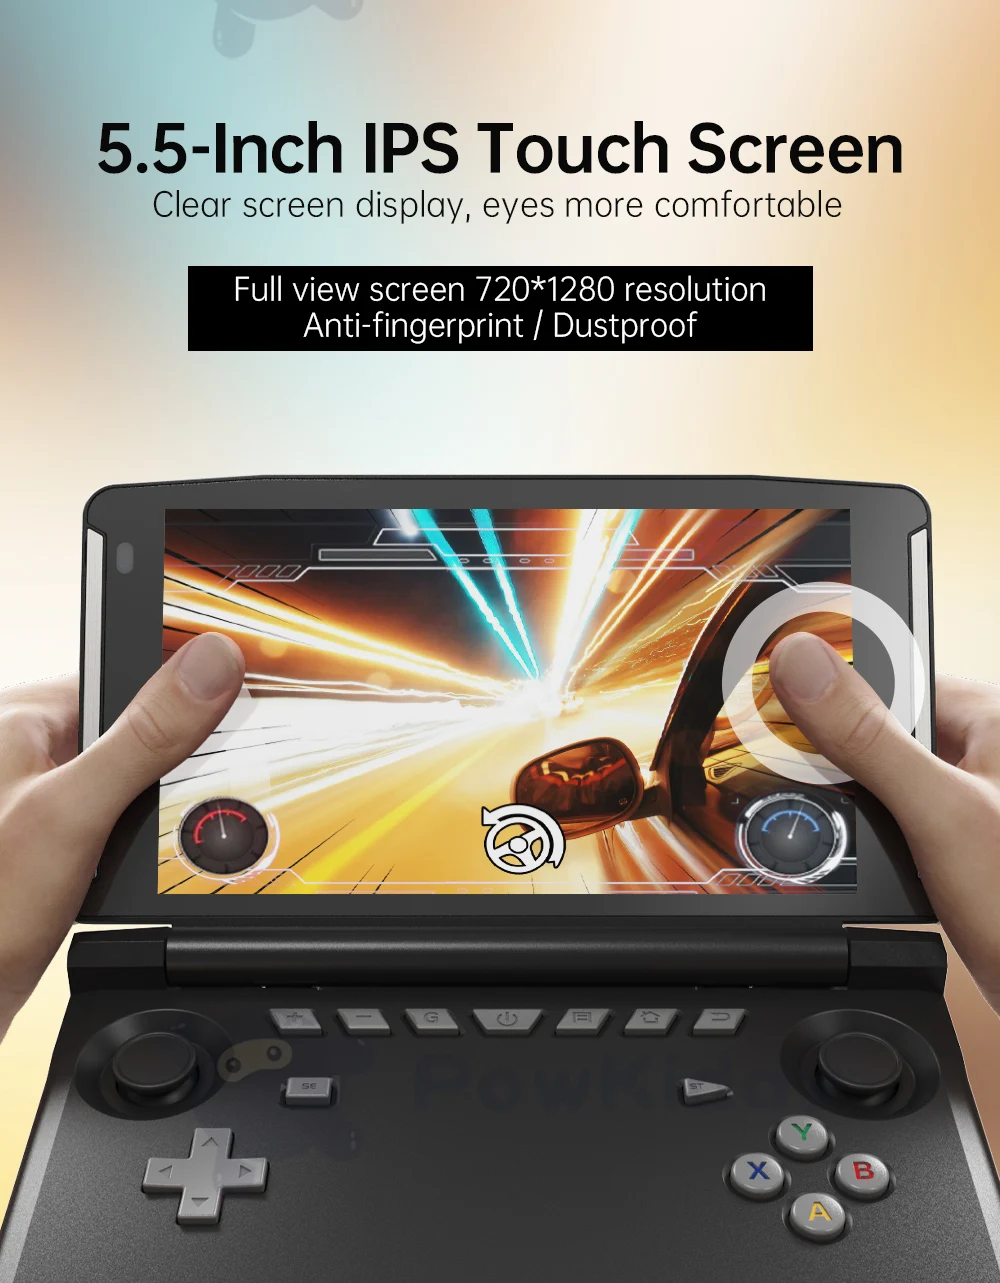 New 5.98 Inch Ayn Odin Pro Handheld Game Console 8G+256GB SD845 Win 11  Android 11 Retro Video Games Players With Wifi TV Out Box - AliExpress